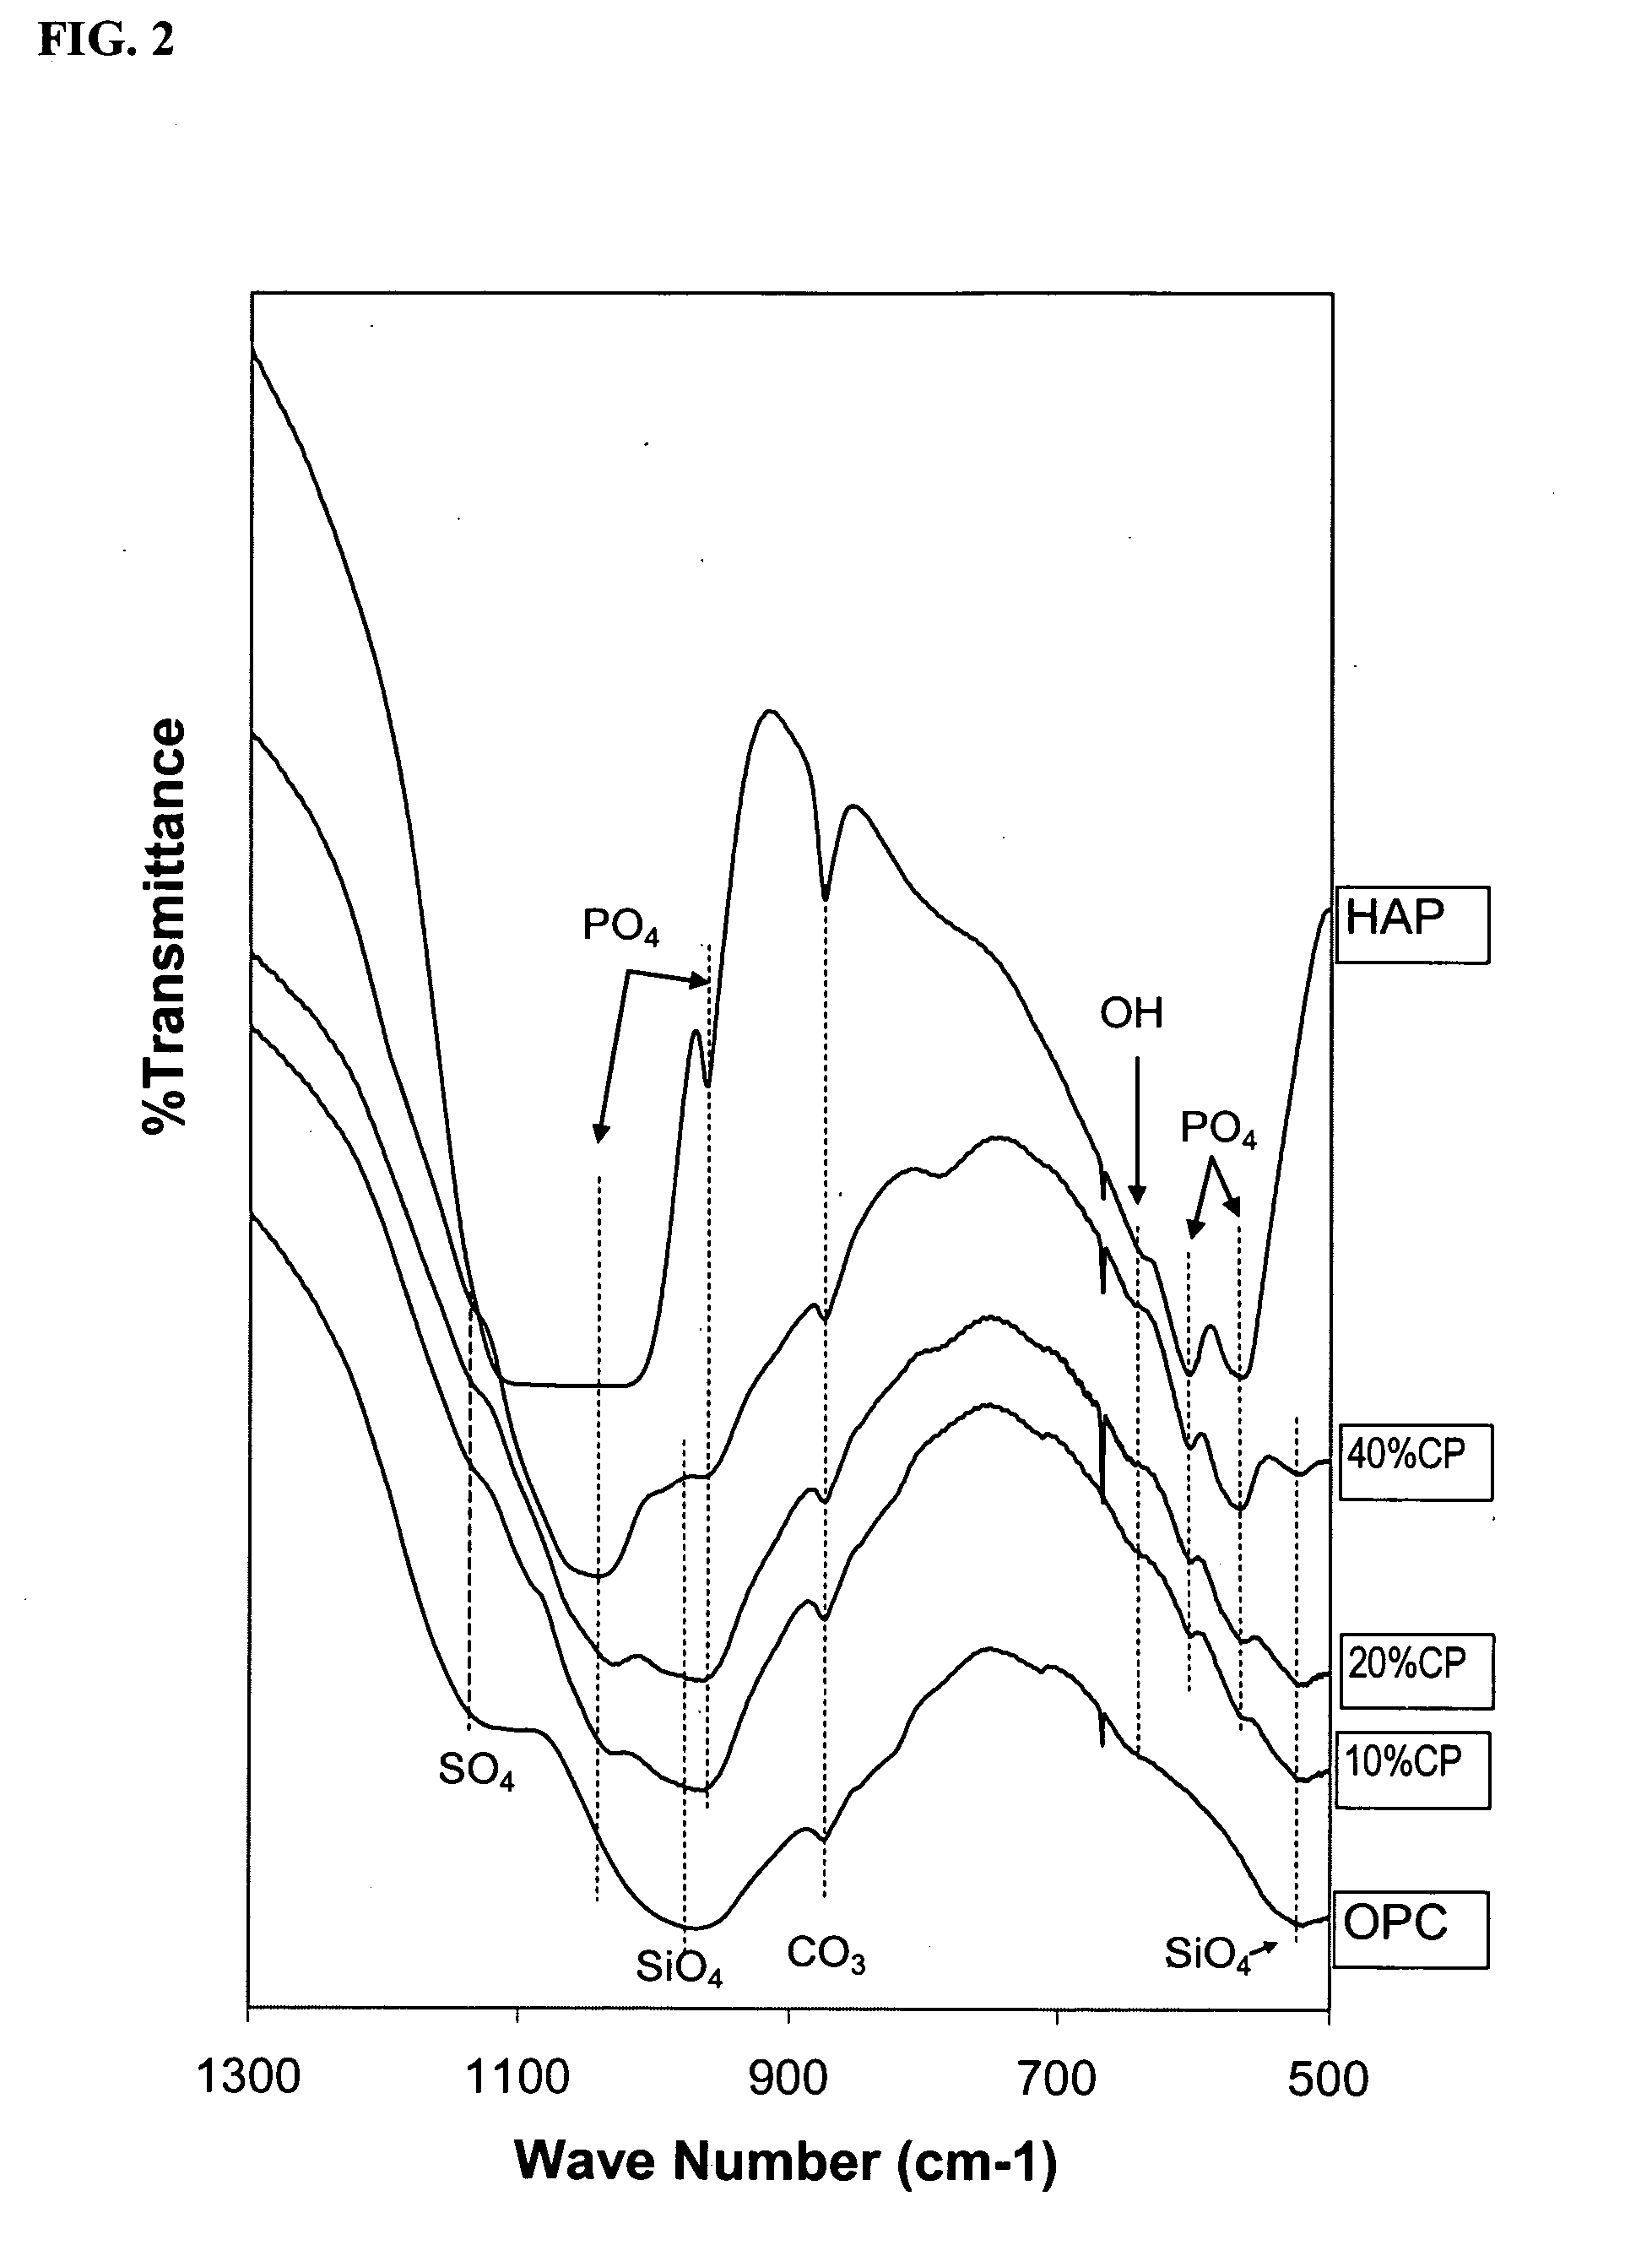 Hydraulic cement compositions and methods of making and using the same